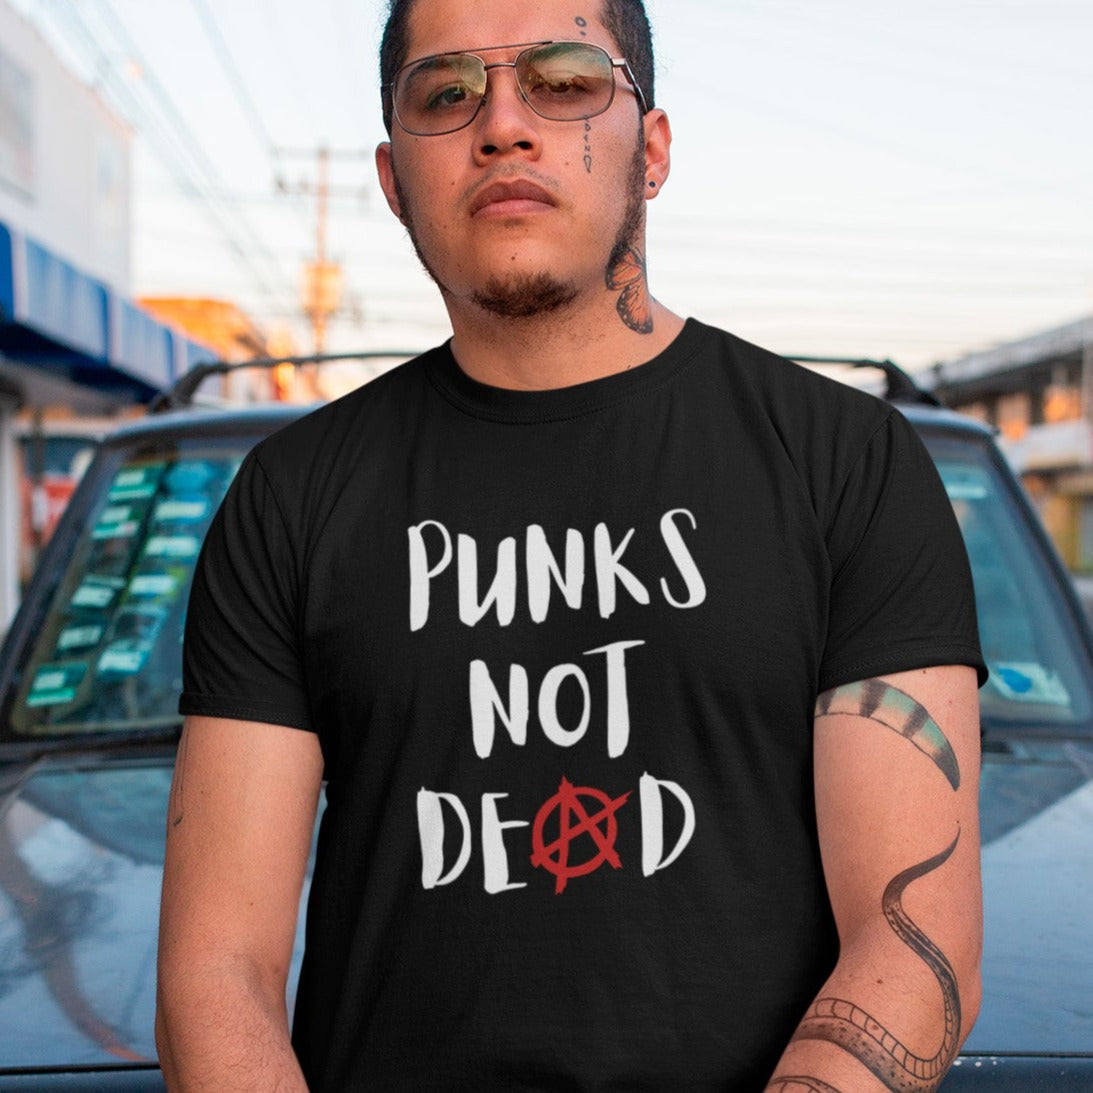 punks-not-dead-anarchy-sign-black-t-shirt-mockup-of-a-tattooed-man-posing-on-the-street